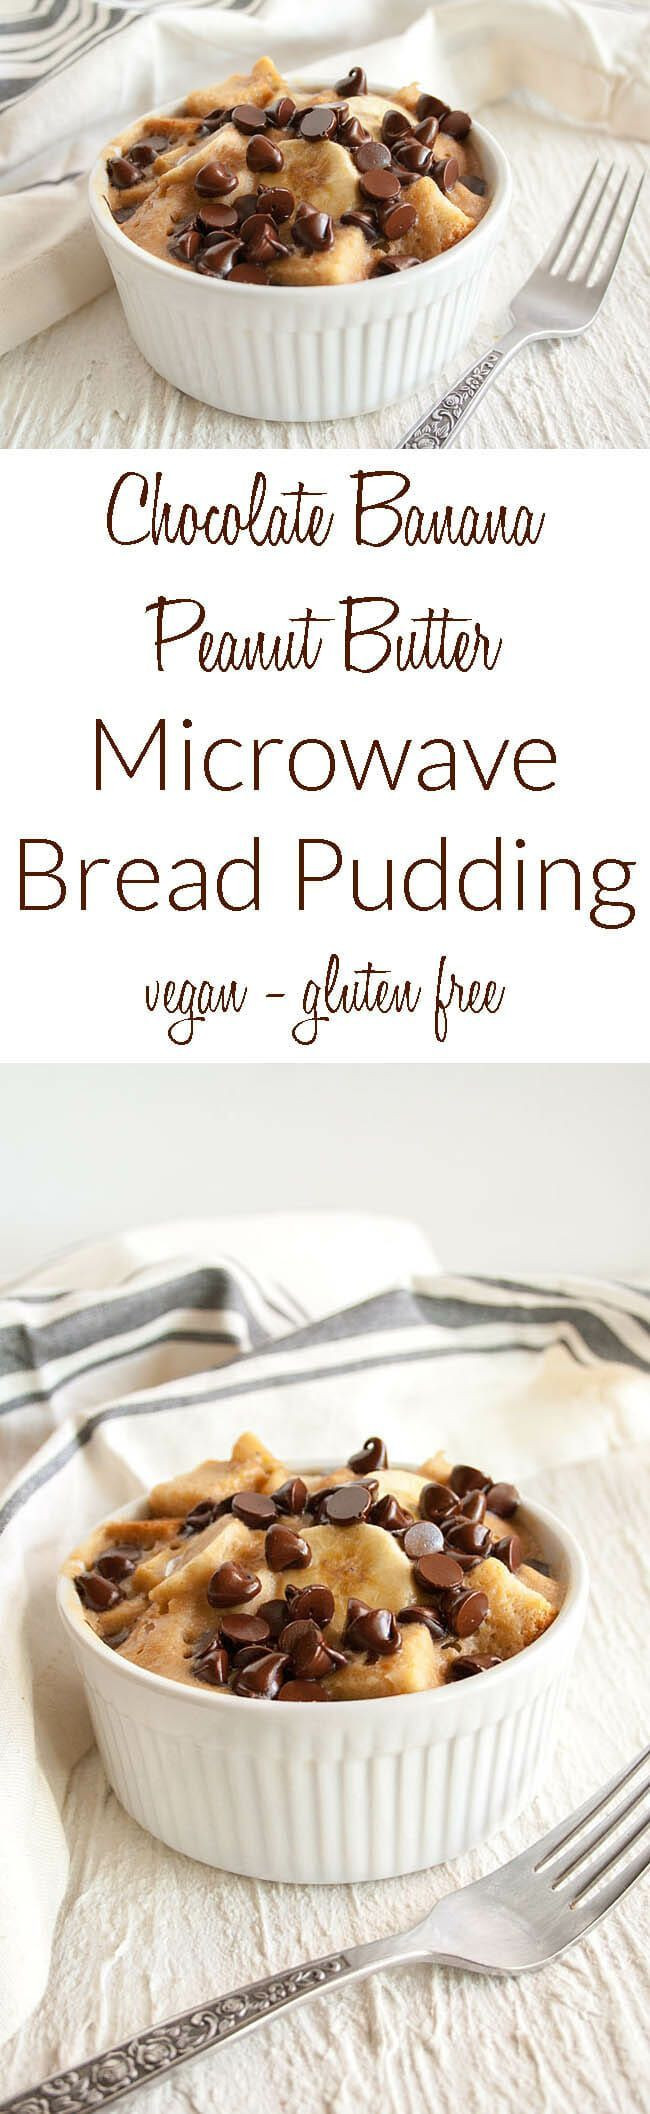 Gluten Free Microwave Bread
 Chocolate Banana Peanut Butter Microwave Bread Pudding